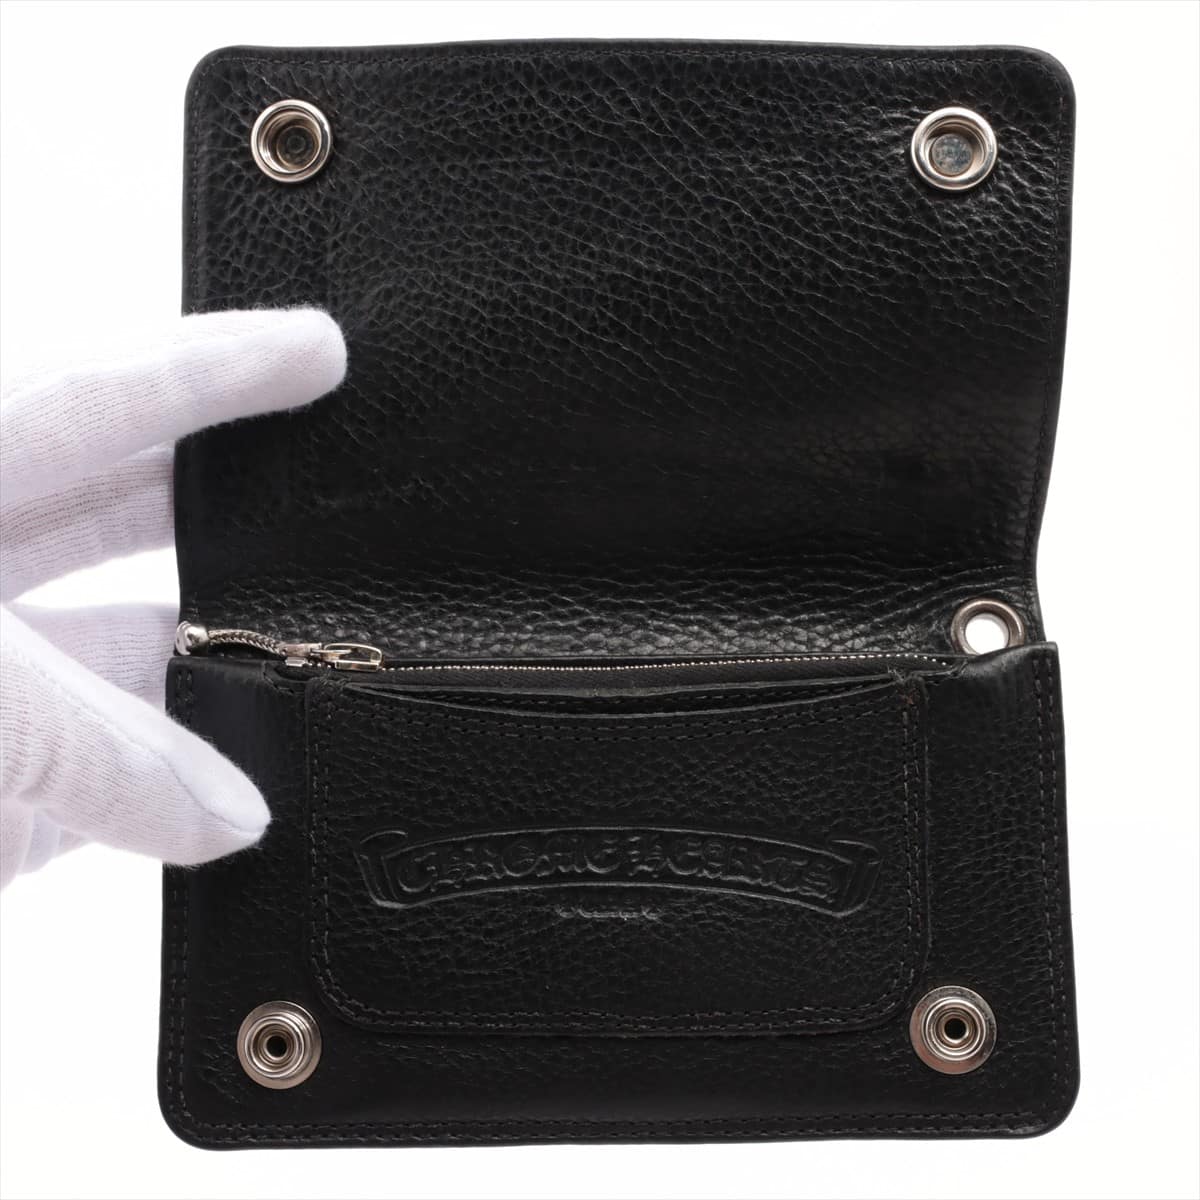 Chrome Hearts 1zipp Wallet Leather With invoice Cross button Black